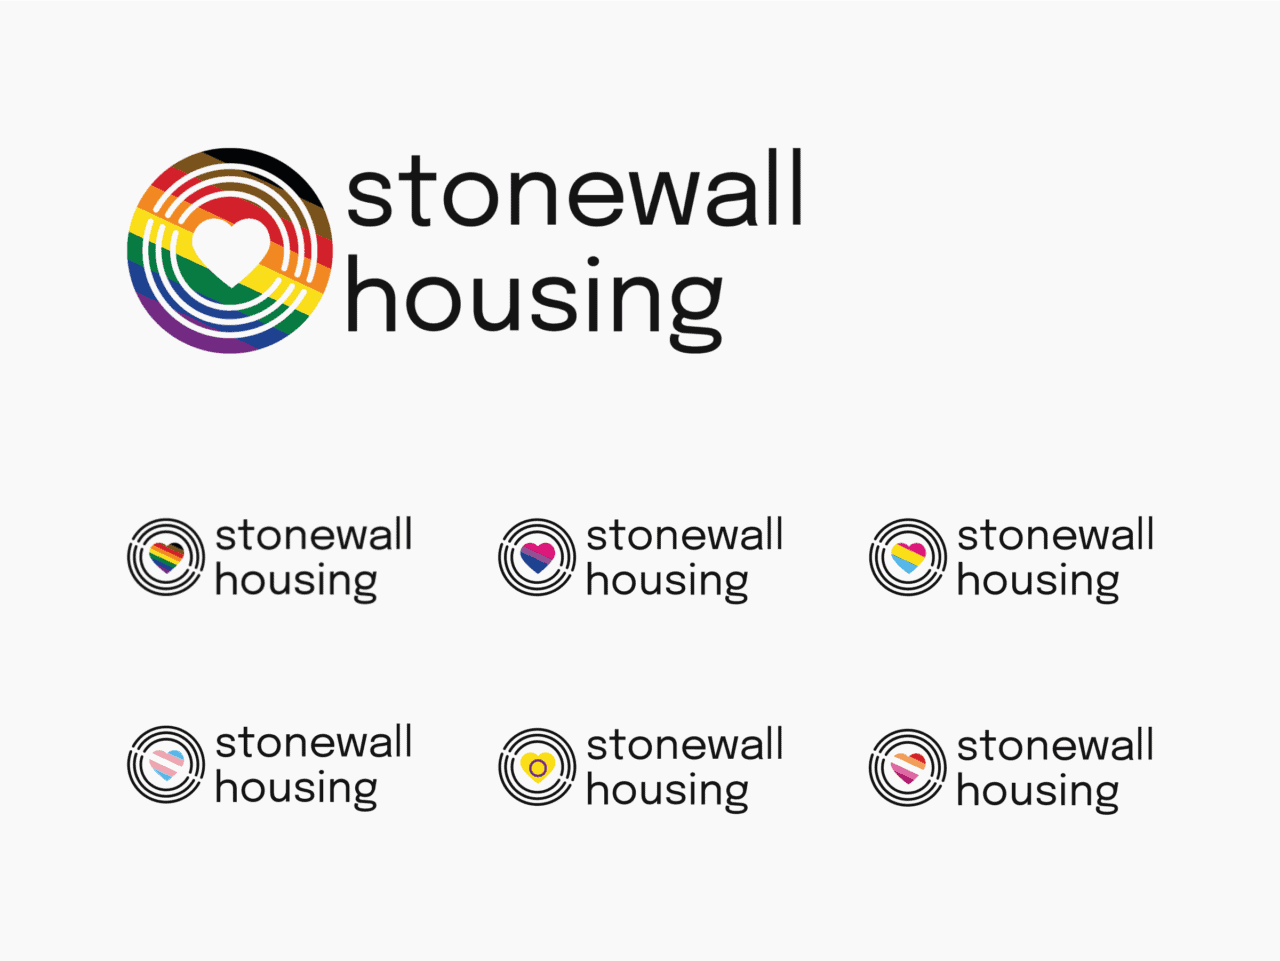 Branding for Stonewall Housing featuring variations of the logo with different pride flag colours